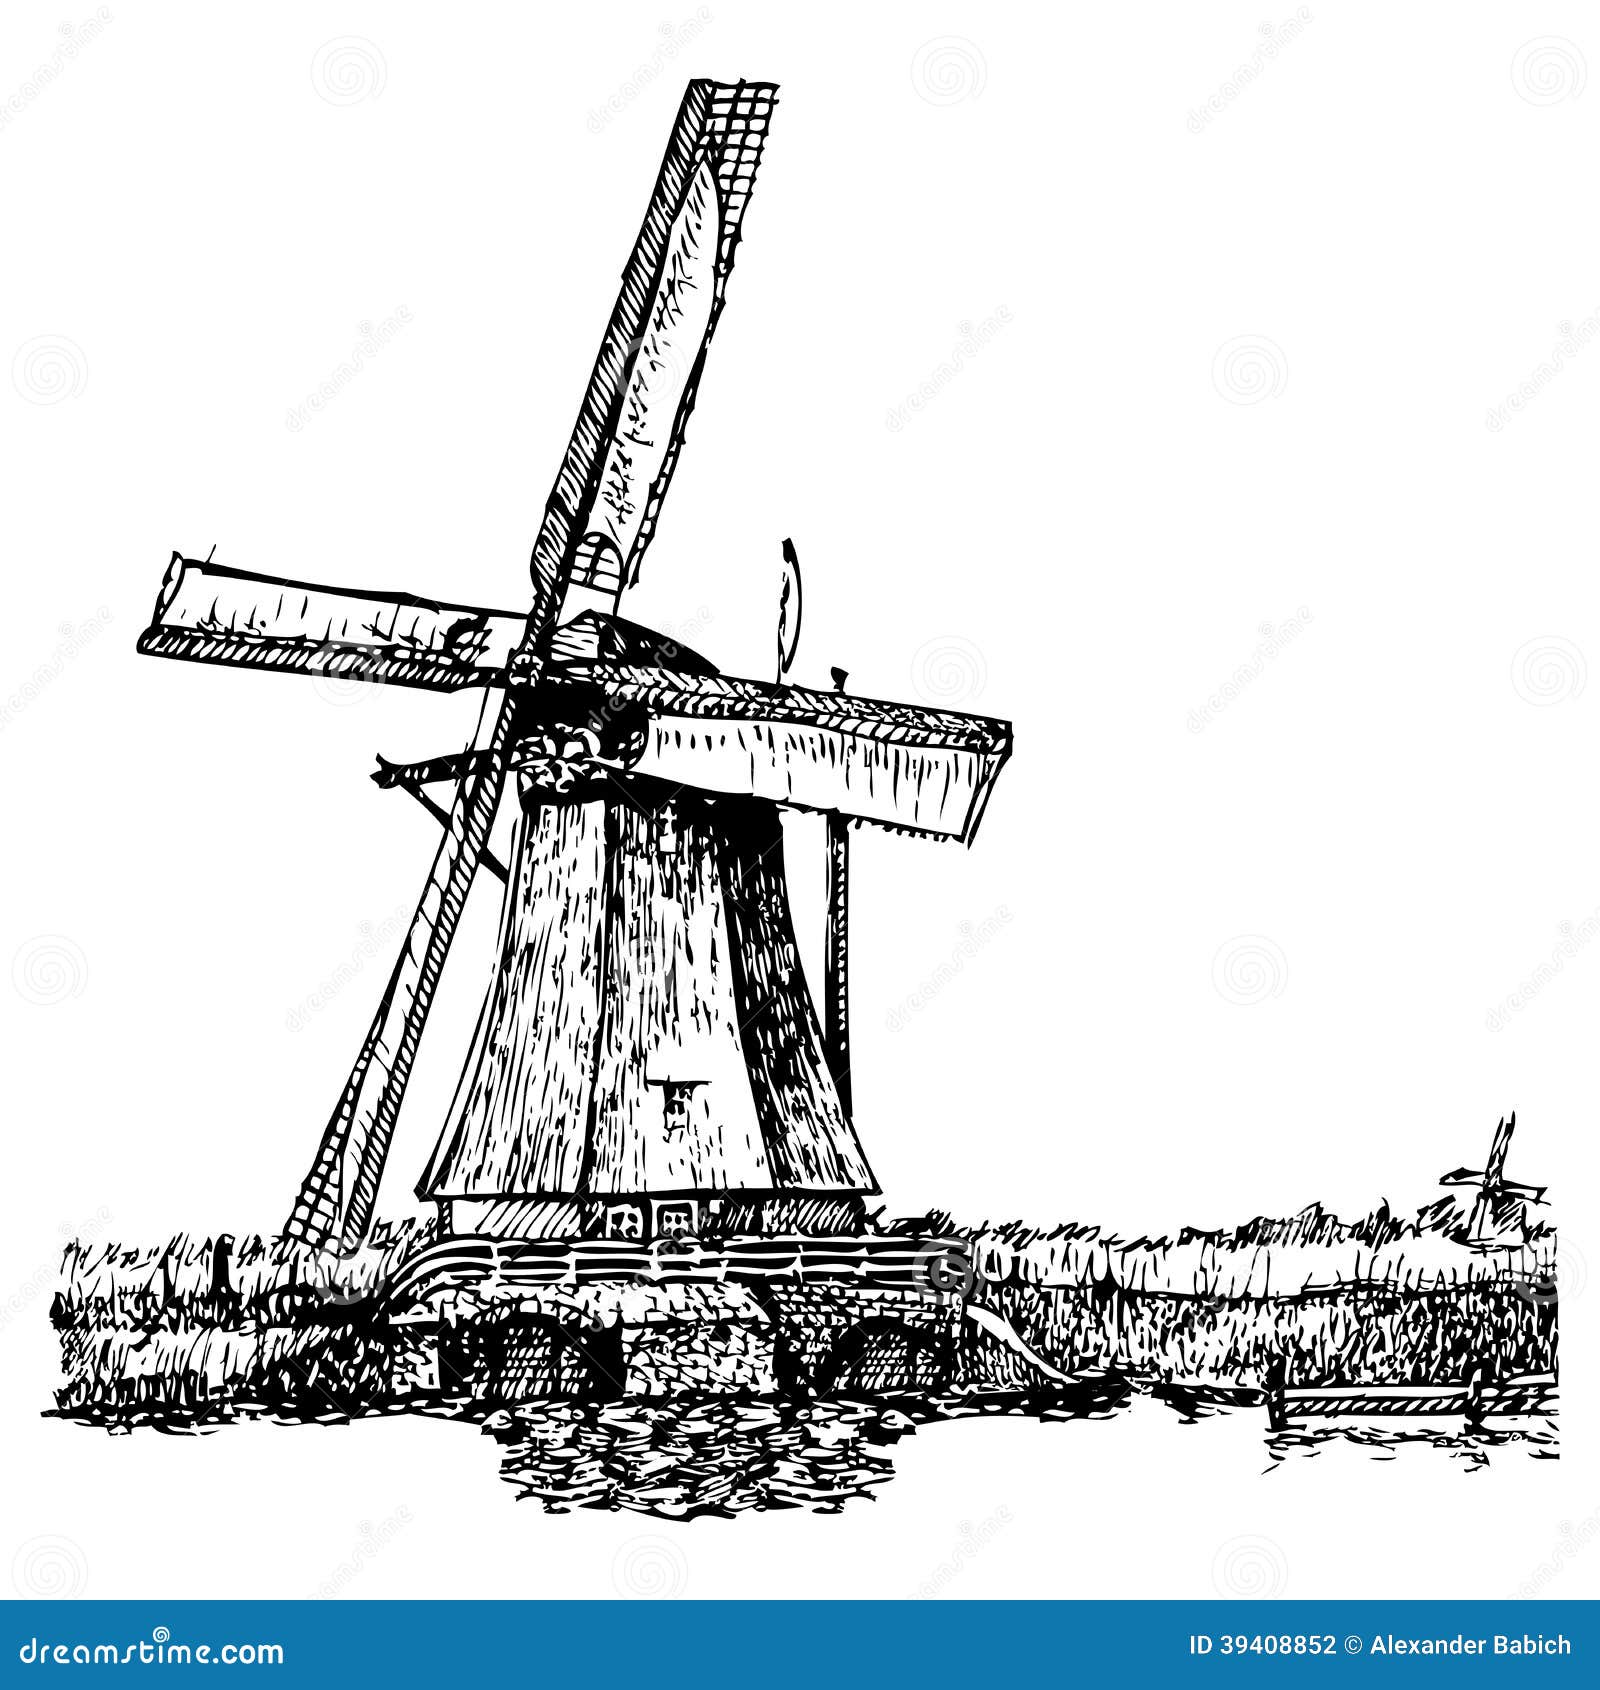 Vector illustration of a windmill stylized as engraving. A traditional 